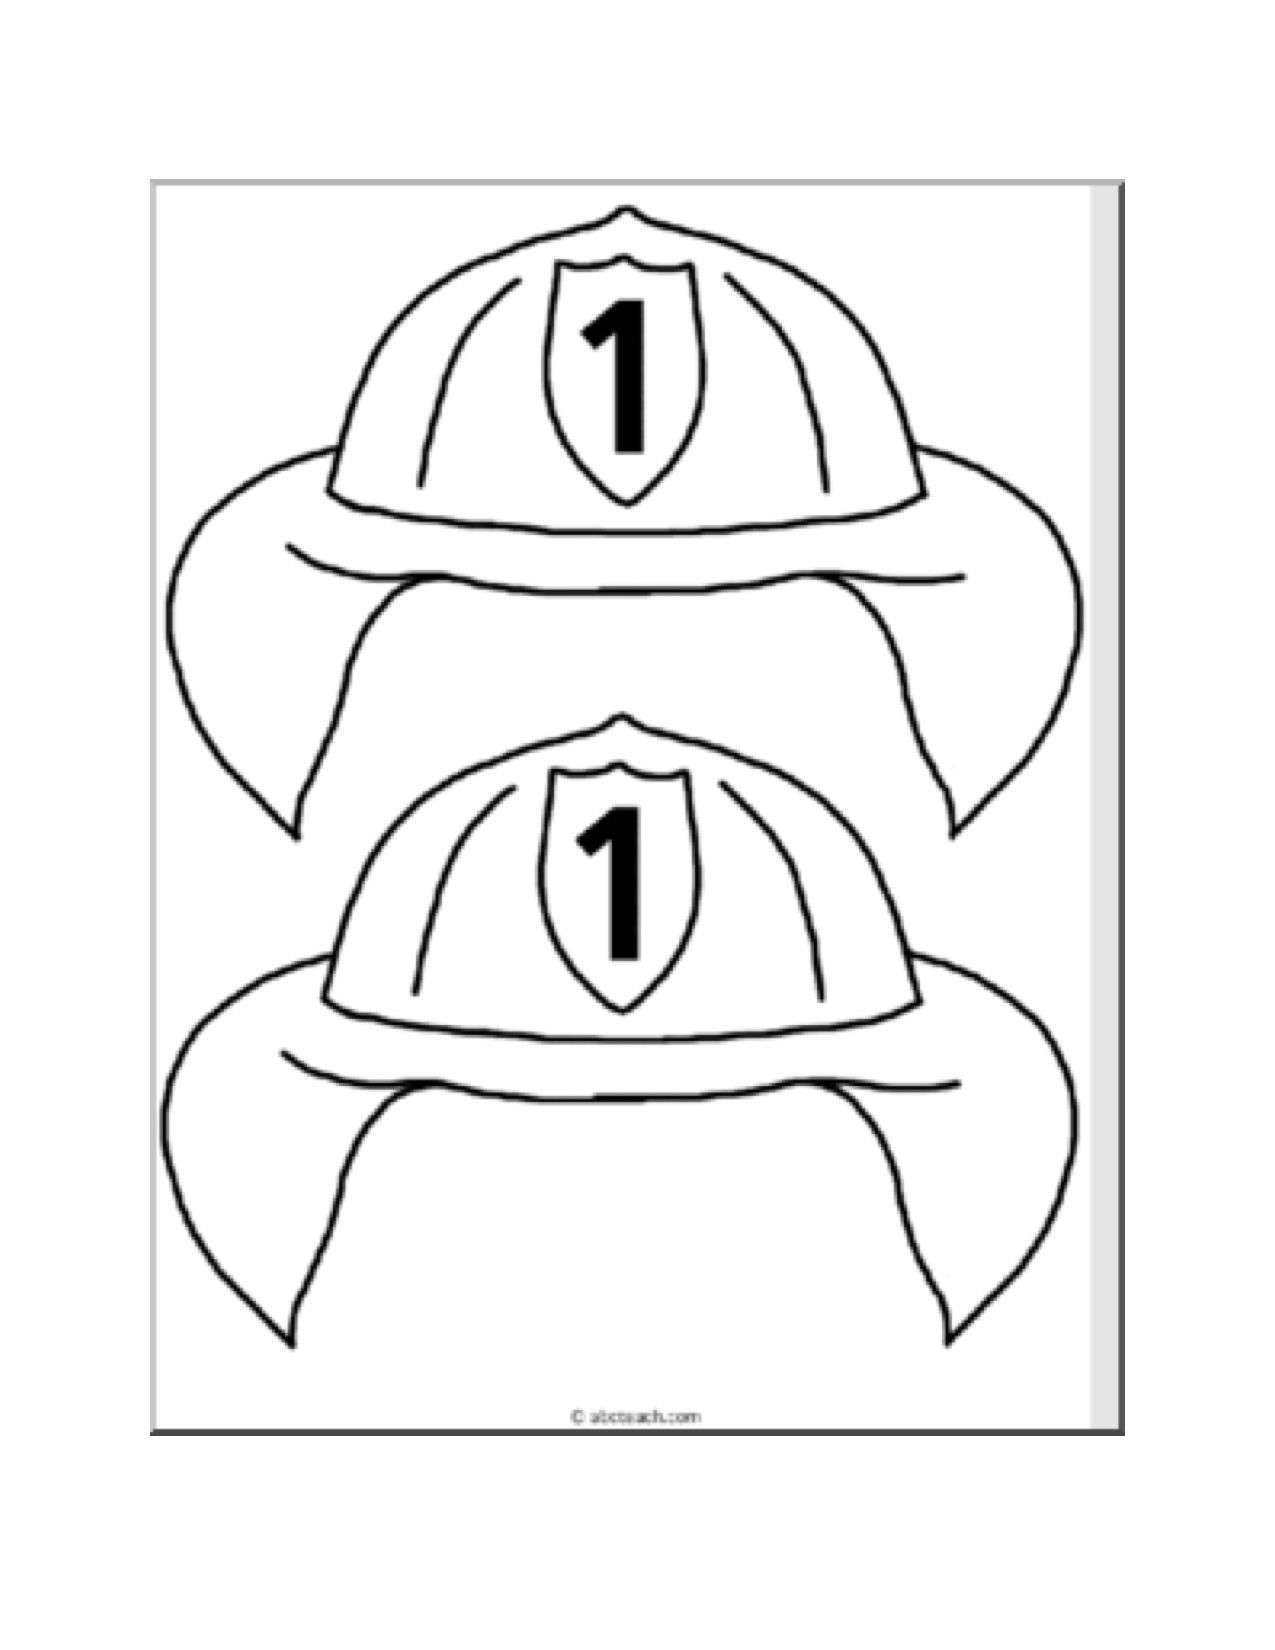 free-fre-printable-coloring-page-fire-hat-download-free-fre-printable-coloring-page-fire-hat